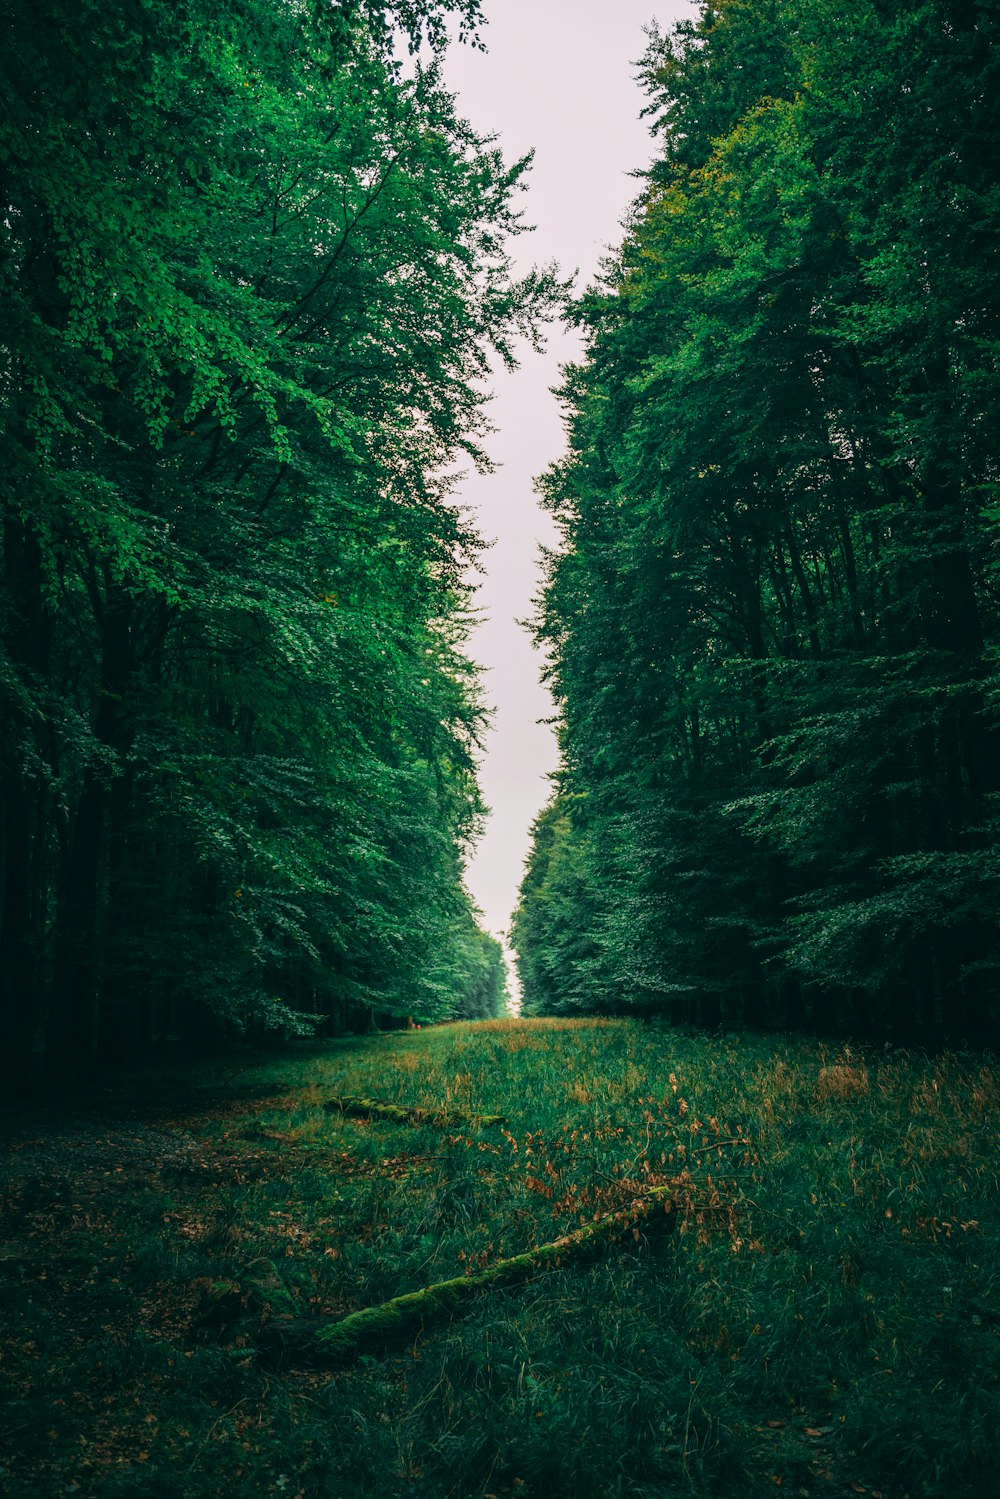 a road in the middle of a forest lined with trees